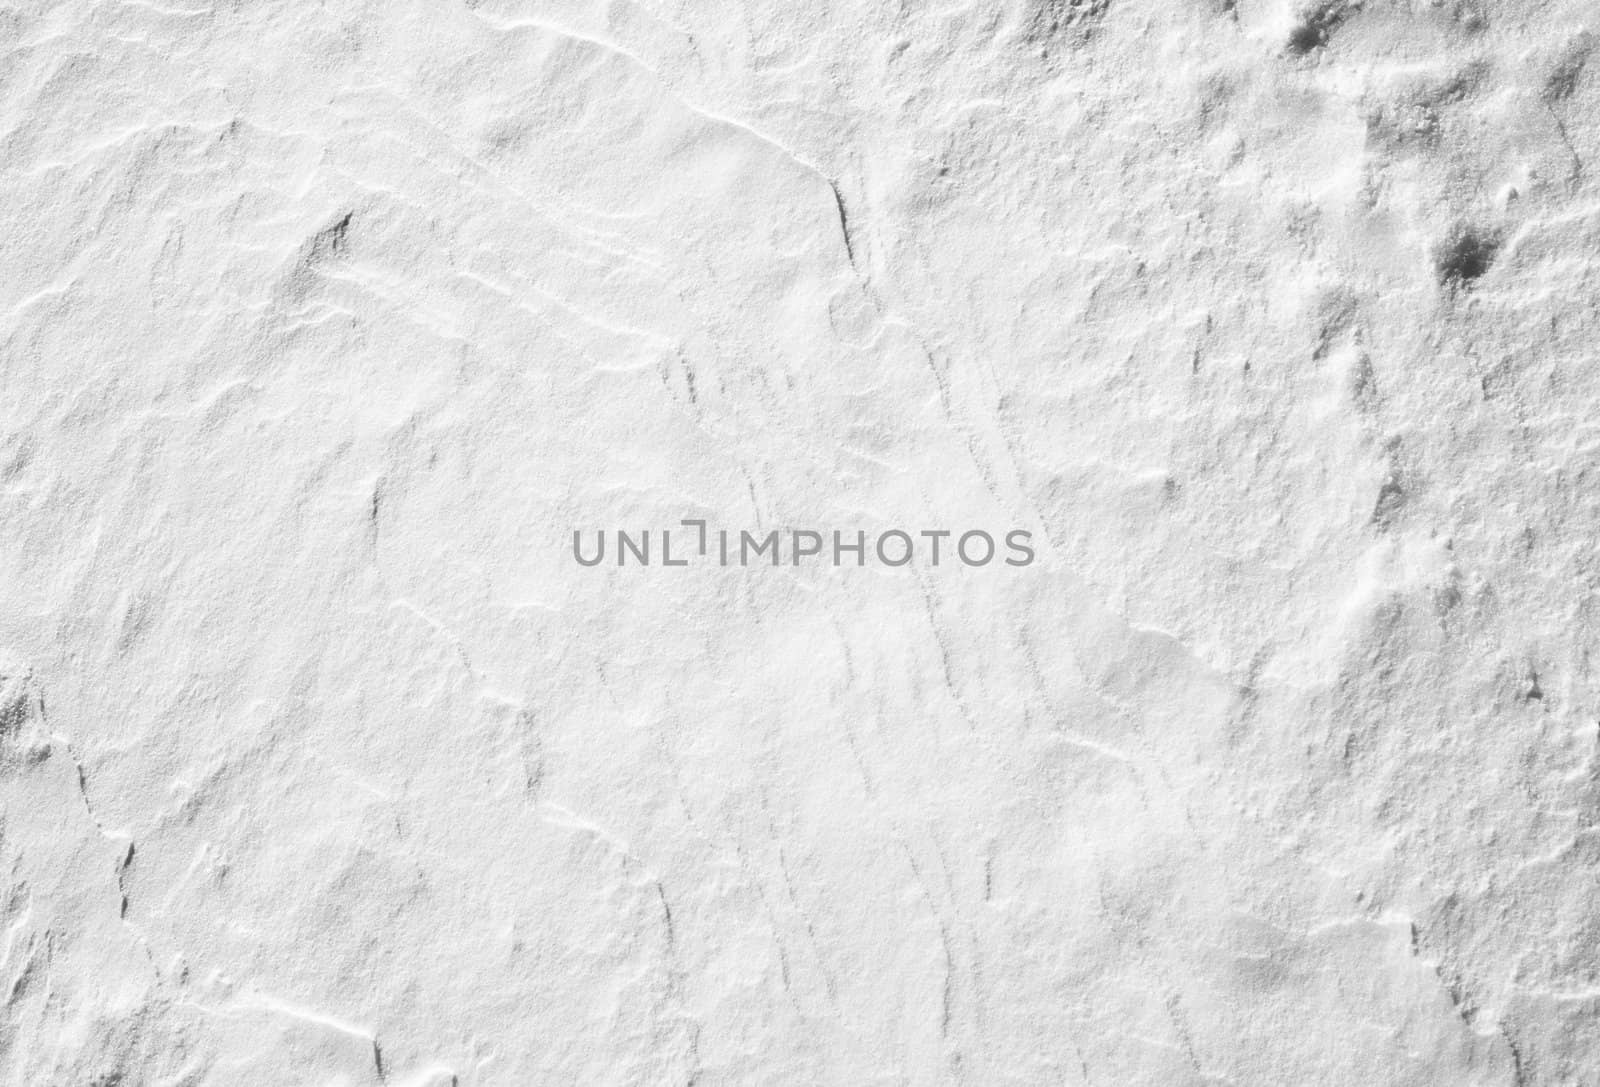 Snow texture details with natural winter light